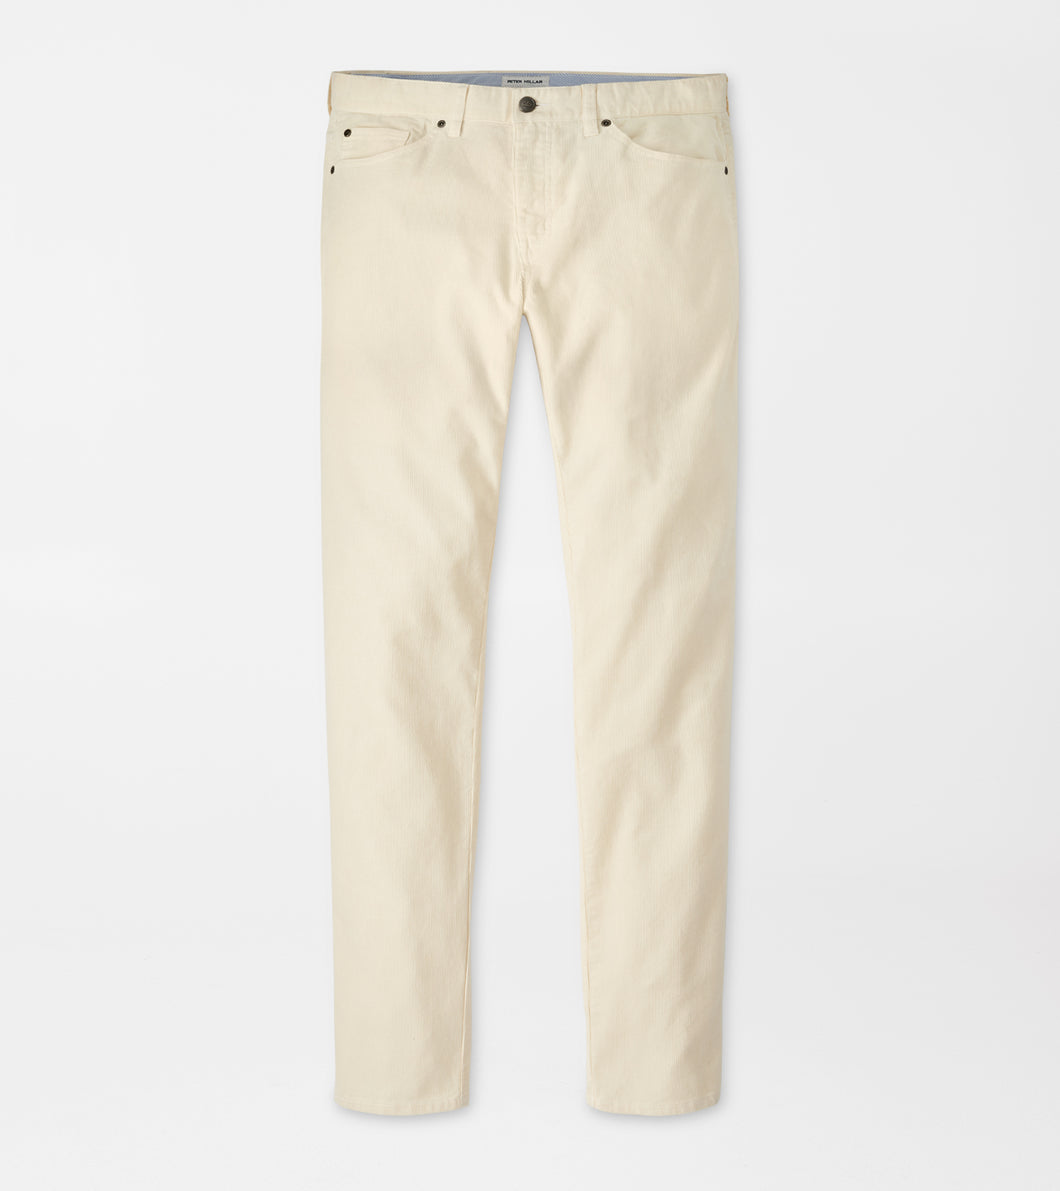 Peter Millar Superior Soft Corduroy Five-Pocket Pant in Ivory